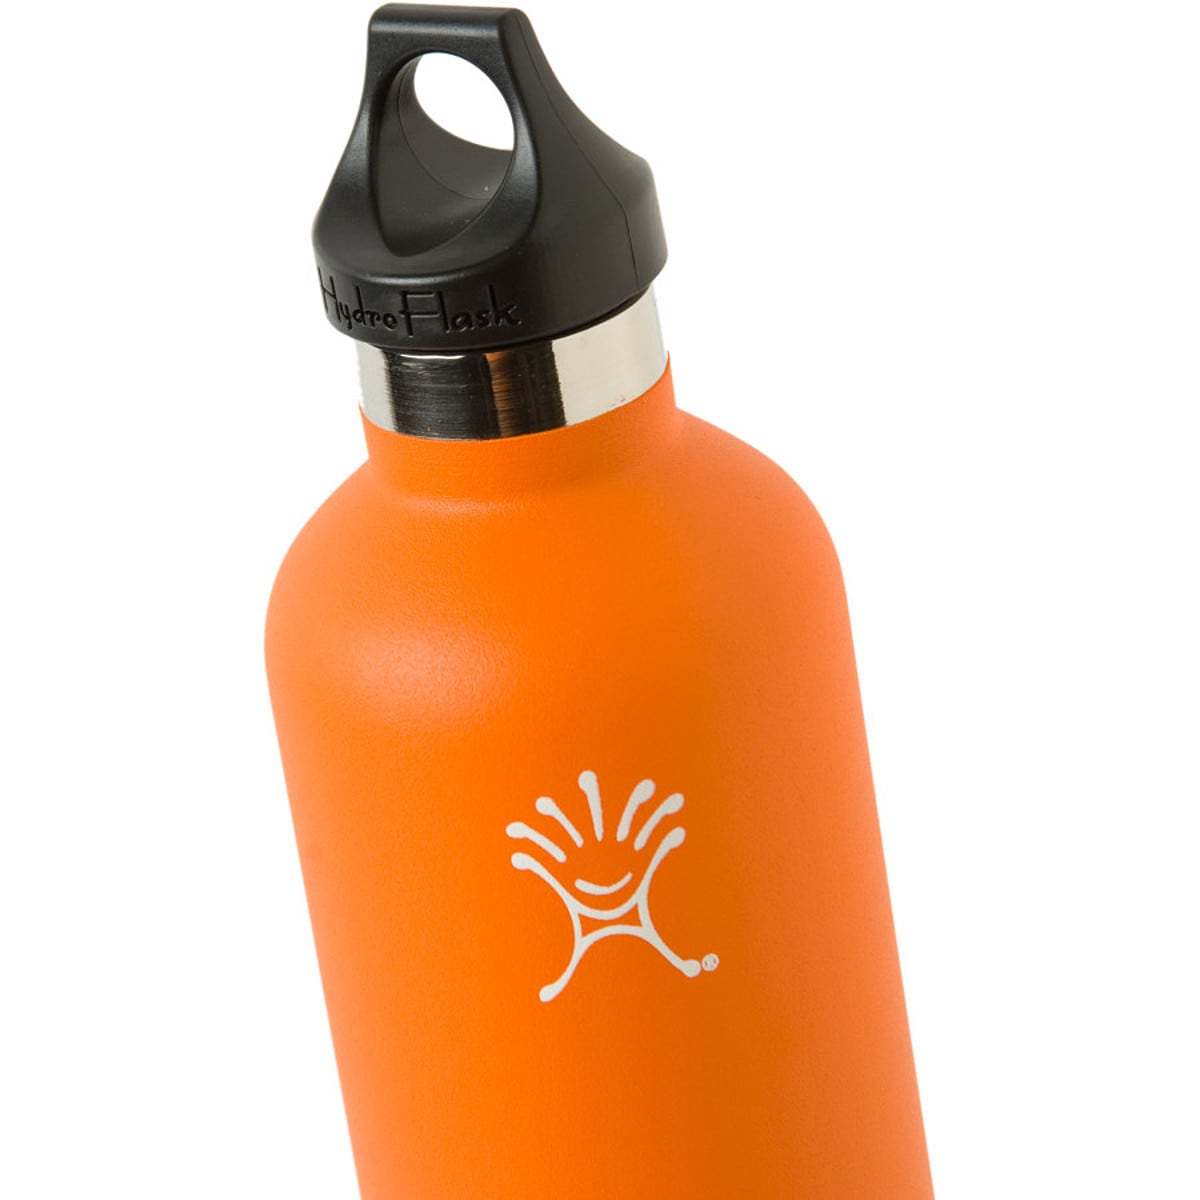 Hydro Flask 18oz. Narrow Mouth Water Bottle - Hike & Camp